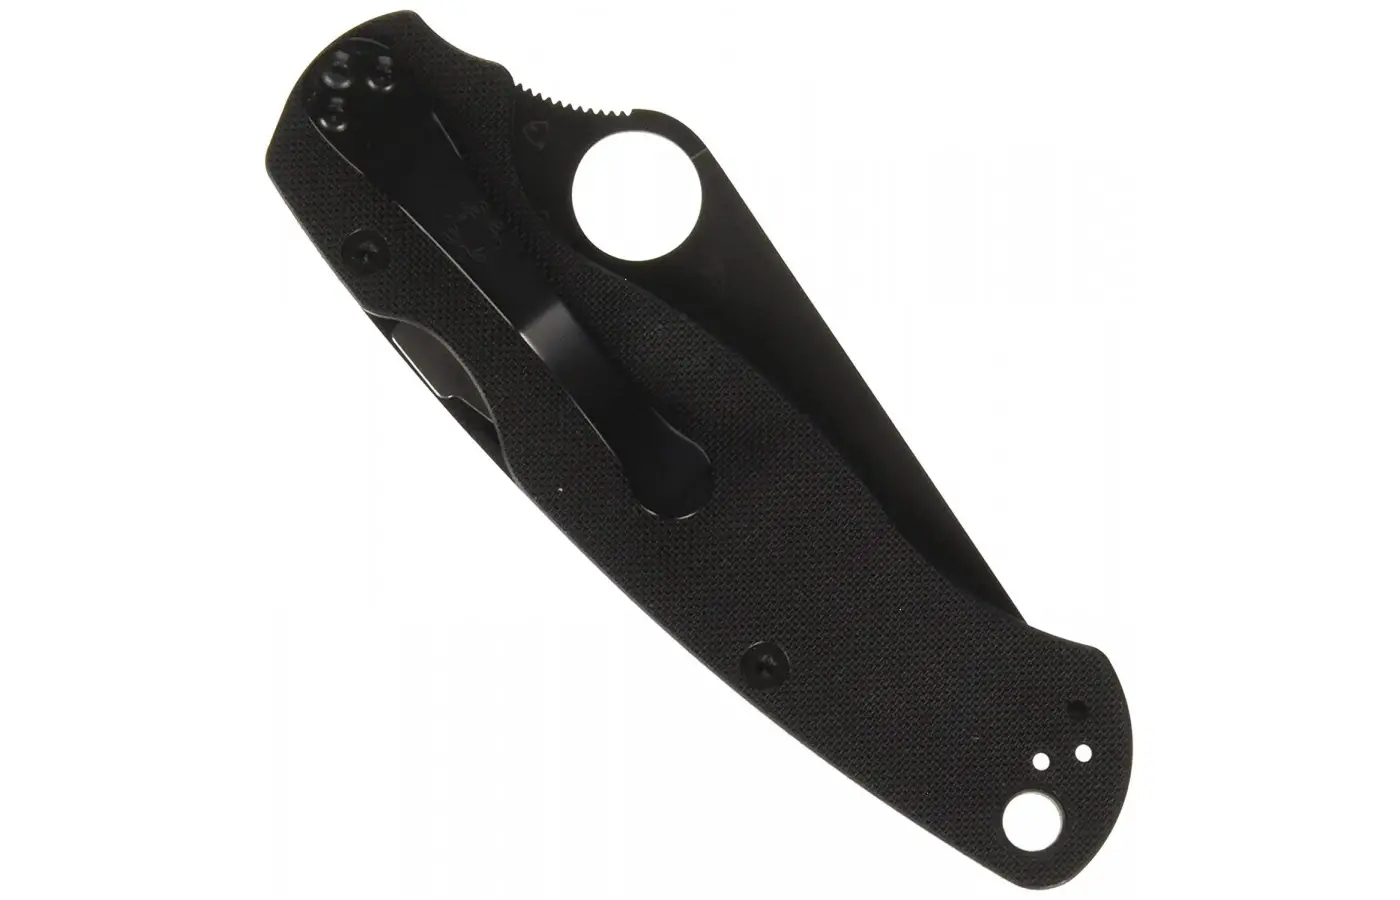 The knife is extremely resistant, durable, reliable, and easy to use.